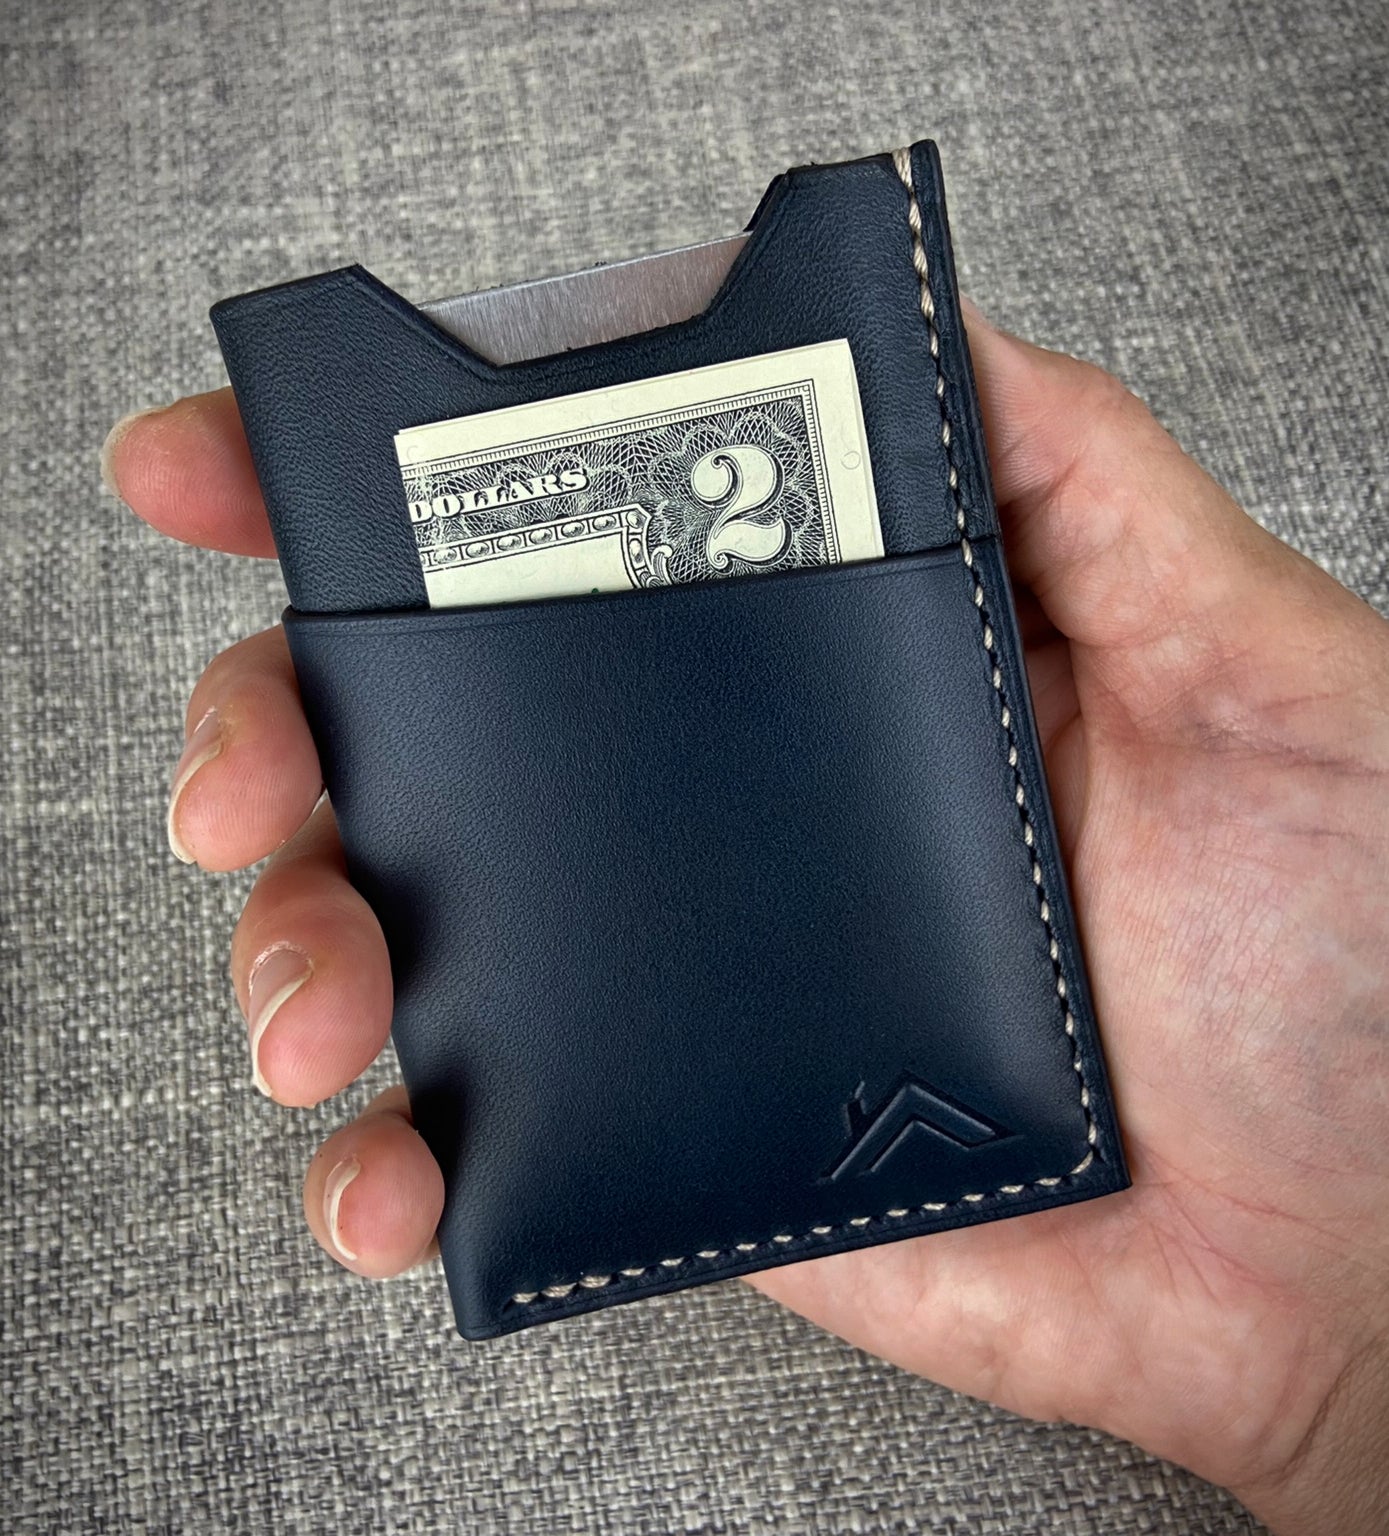 Handcrafted full grain vegatable tanned leather wallet made in New Hampshire, USA.